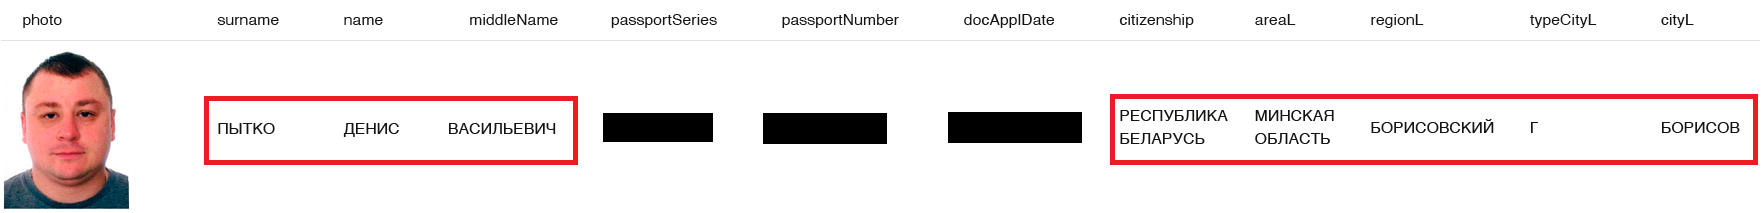 Data from the Passport Automated Information System; provided by Cyberpartisans hacker group